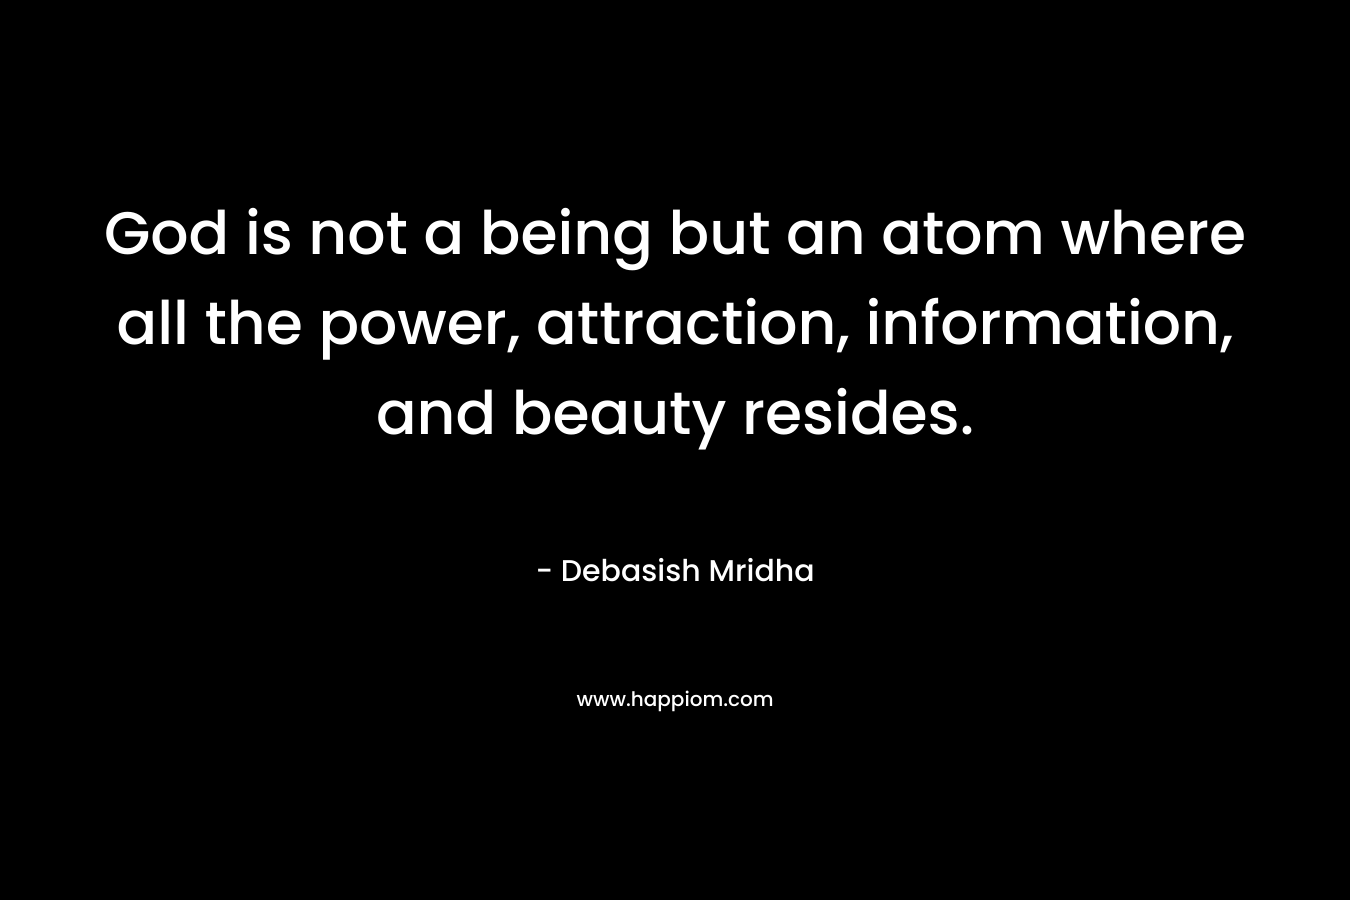 God is not a being but an atom where all the power, attraction, information, and beauty resides.